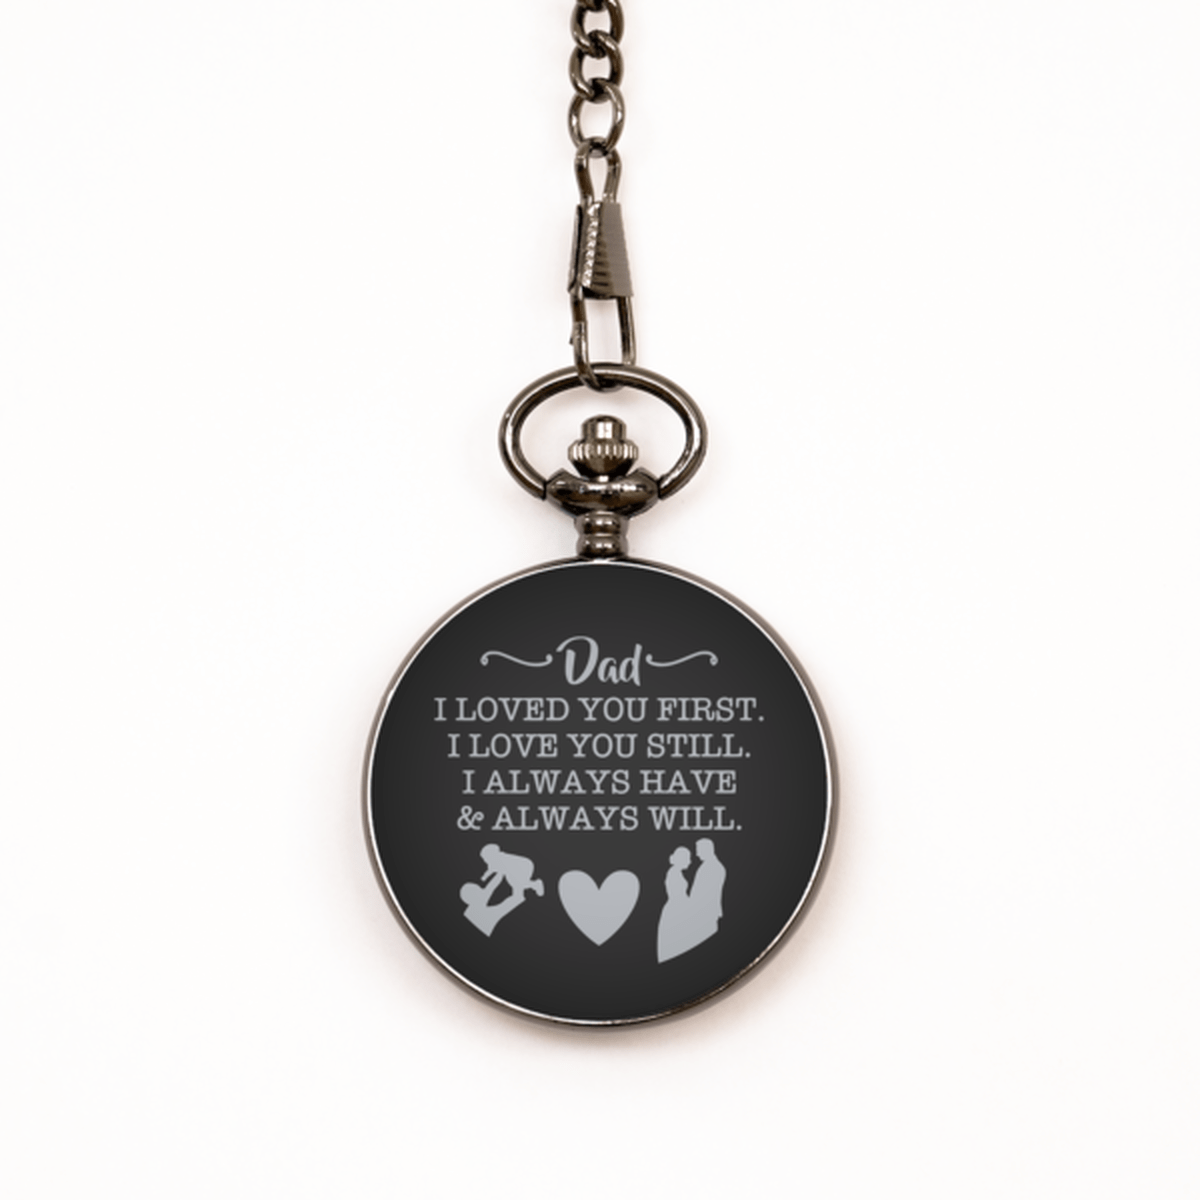 Father of the Bride Black Pocket Watch - Gift for Dad - Wedding Gift from Bride - I Loved You First - Dad Gift from Daughter